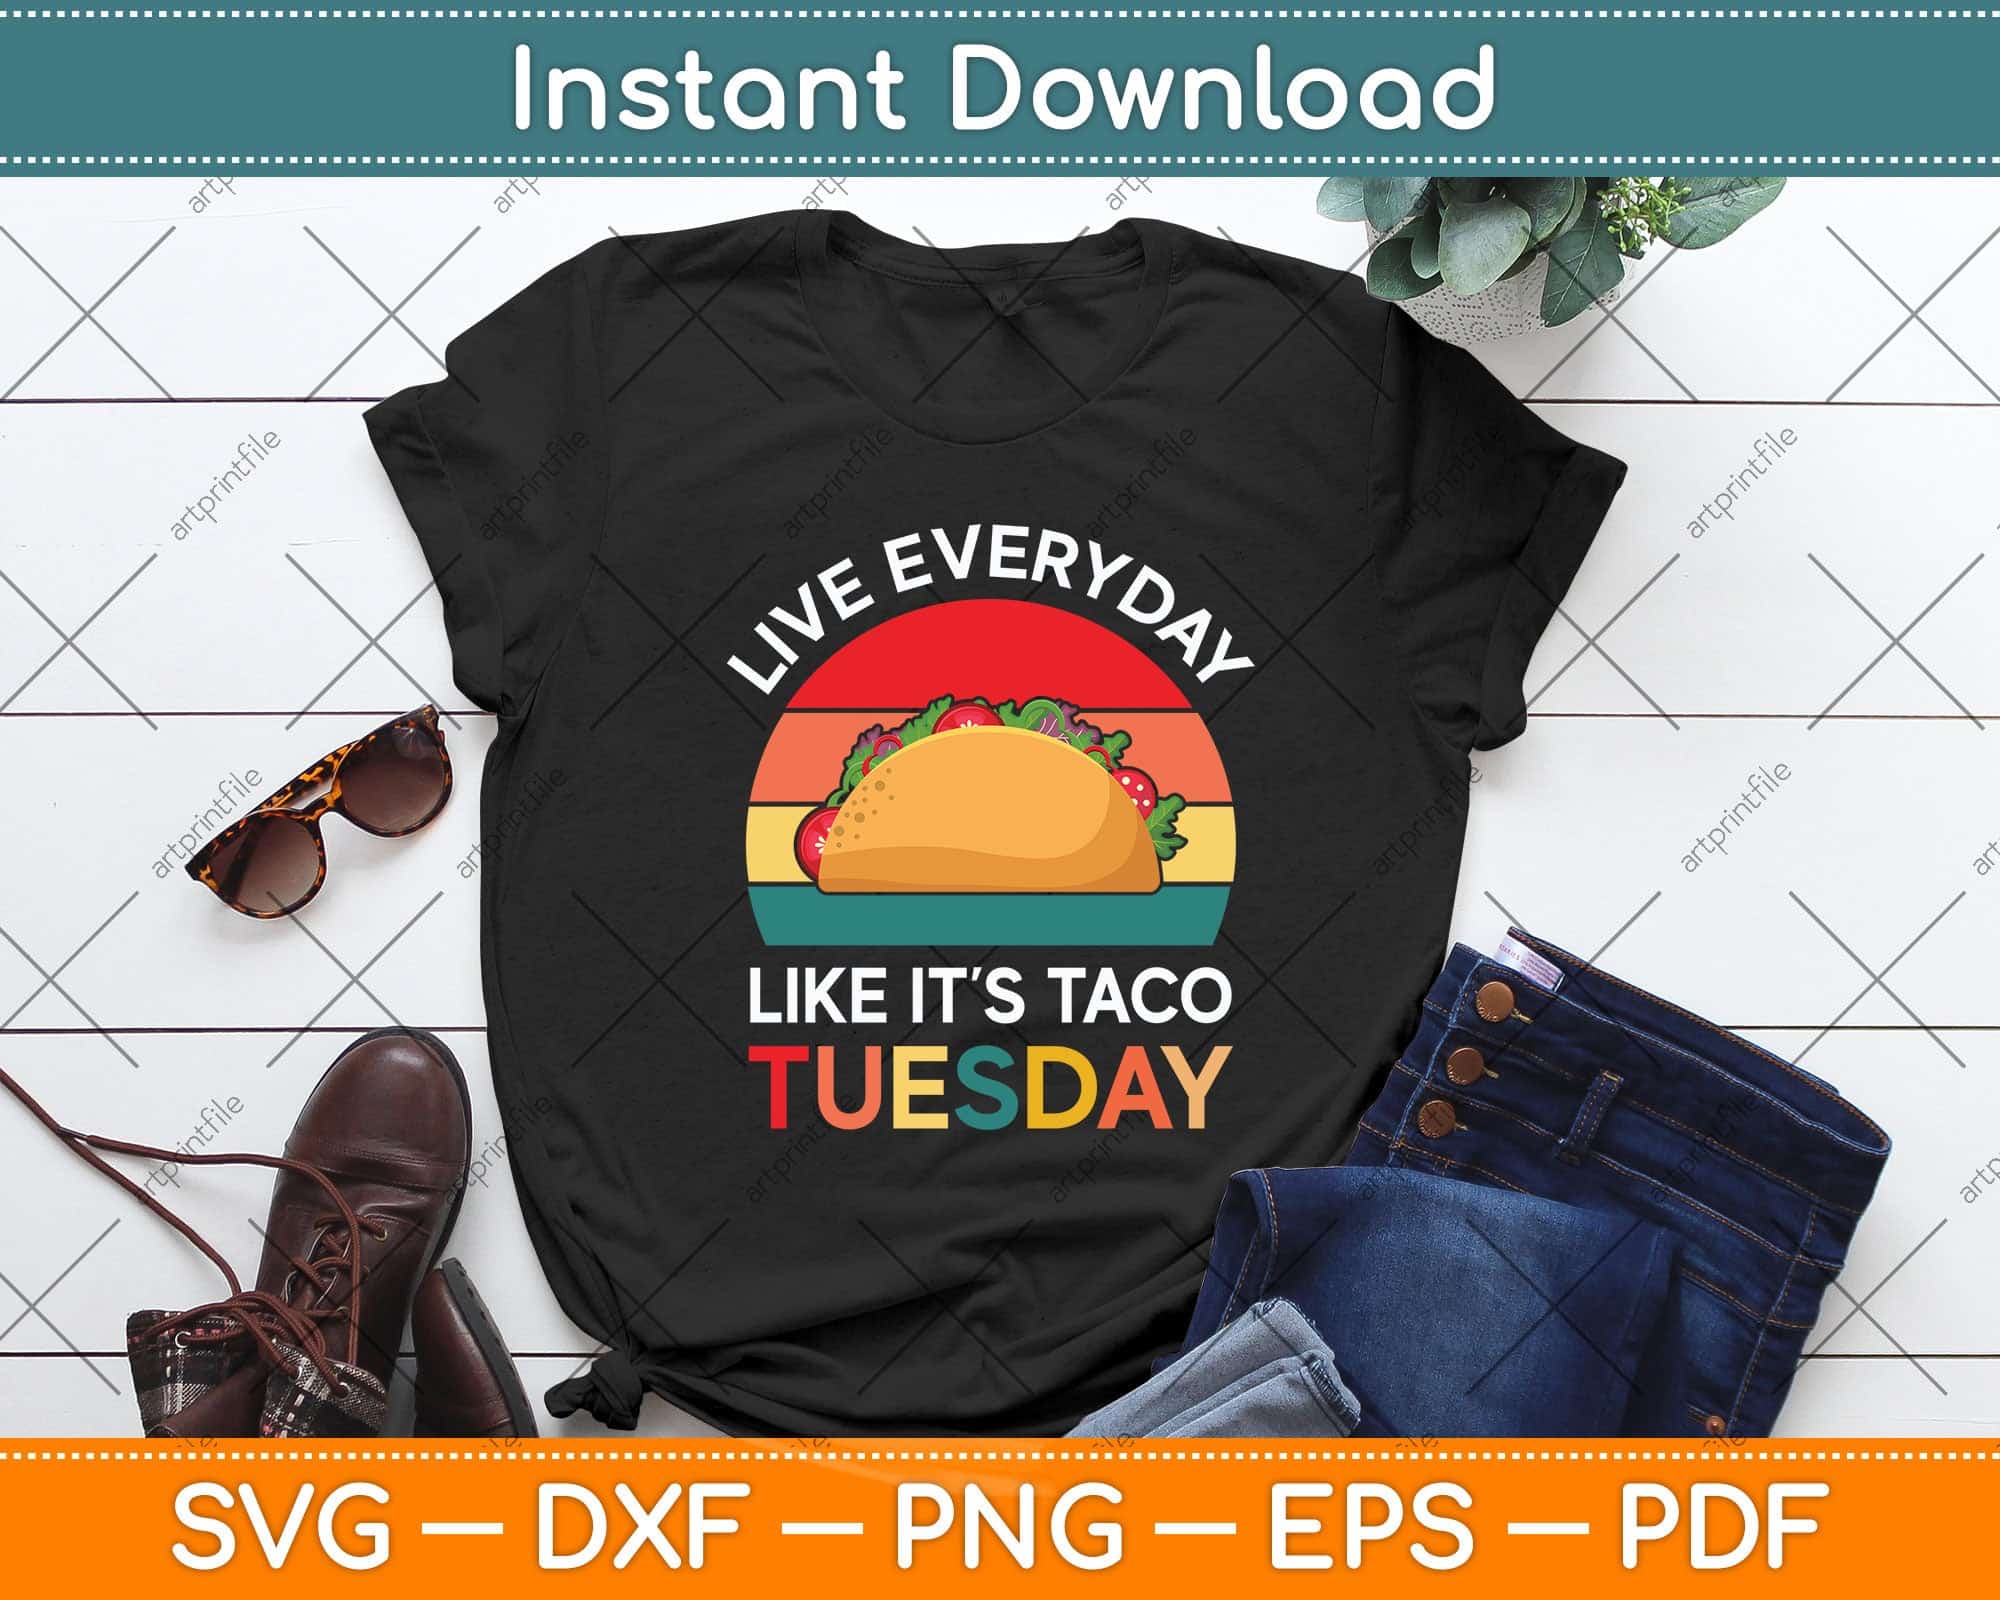 Live Every Day Like It’s Taco Tuesday sign, funny kitchen signs, humorous  gift for taco lovers, kitchen shelf signs